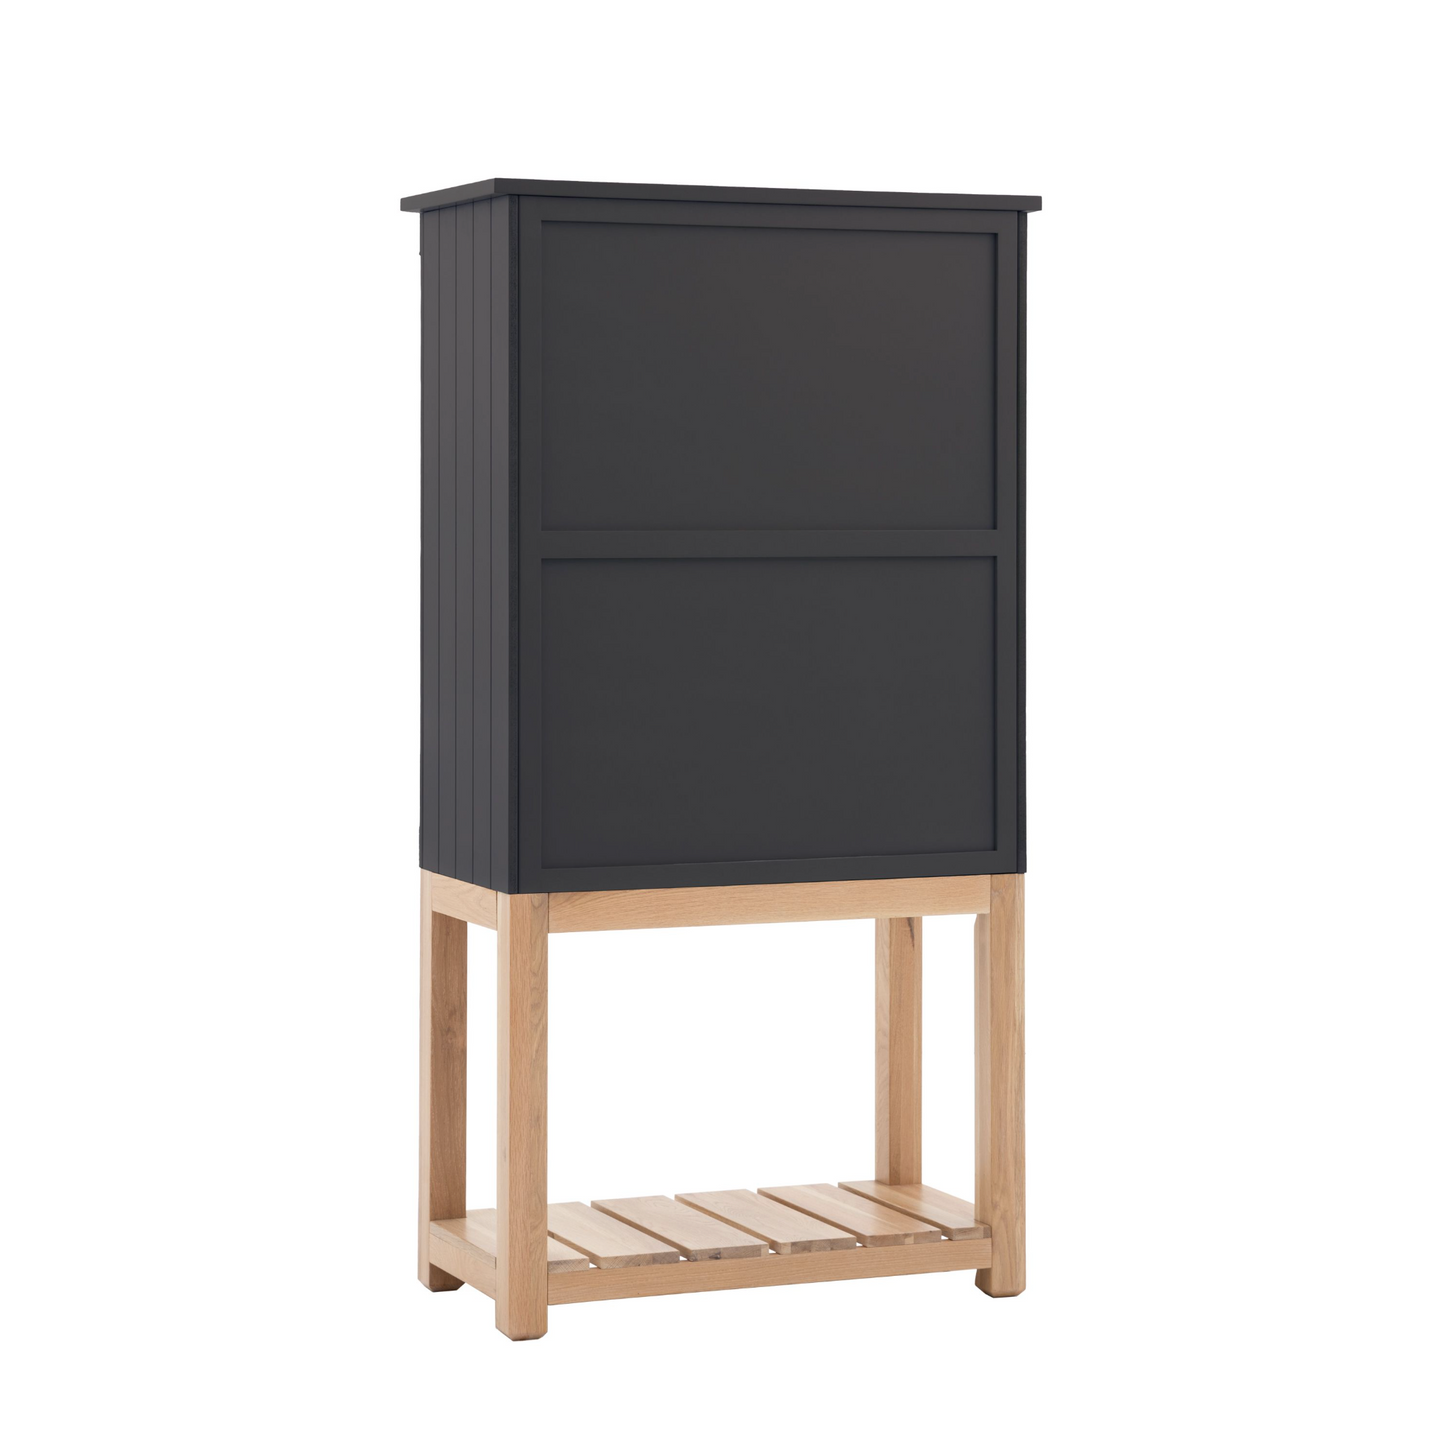 A Buckland 2 Door Storage Cupboard with wooden shelf for interior decor and home furniture.